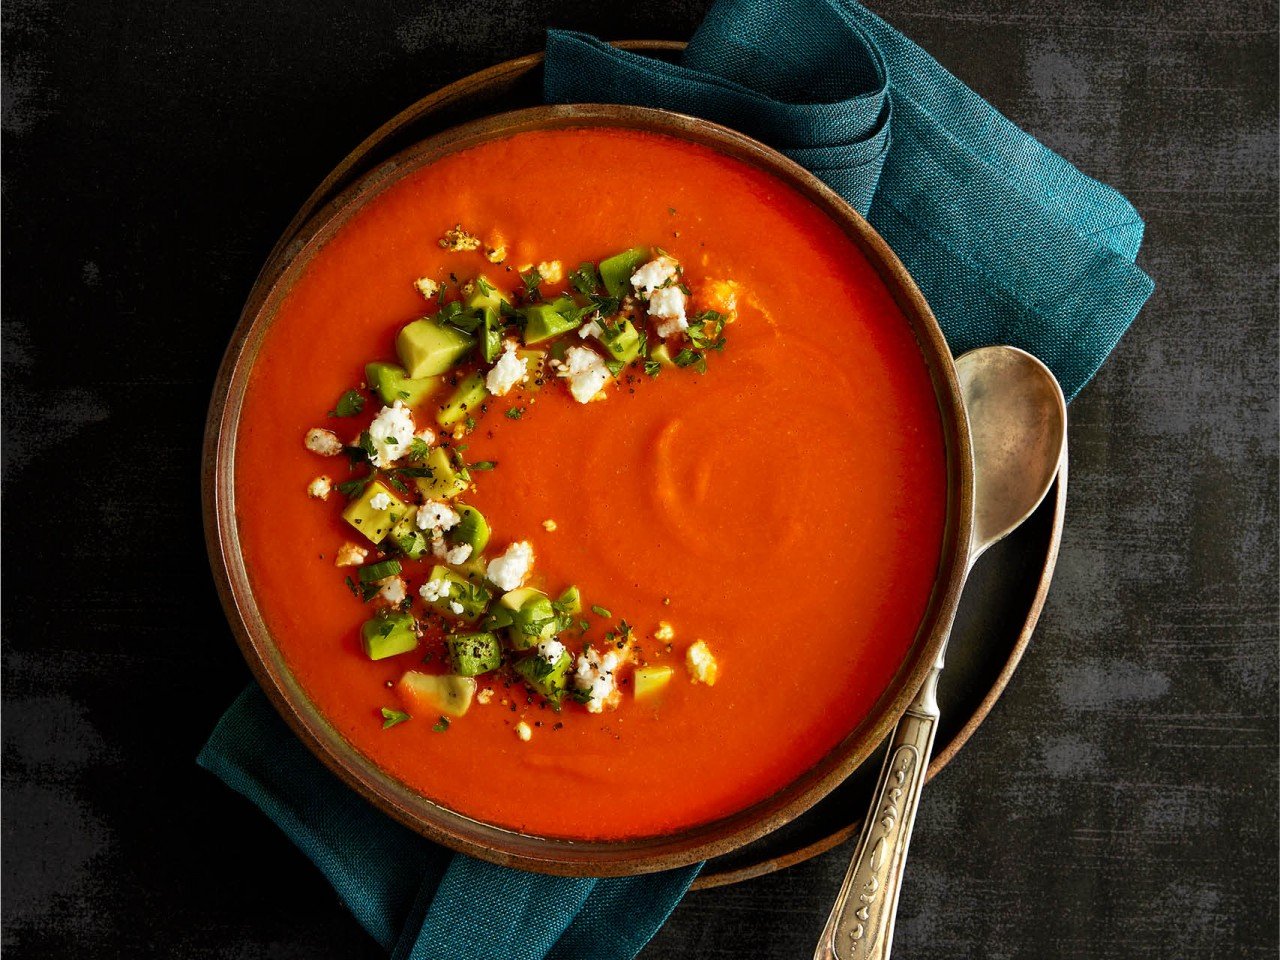 Roasted red pepper and tomato cream soup